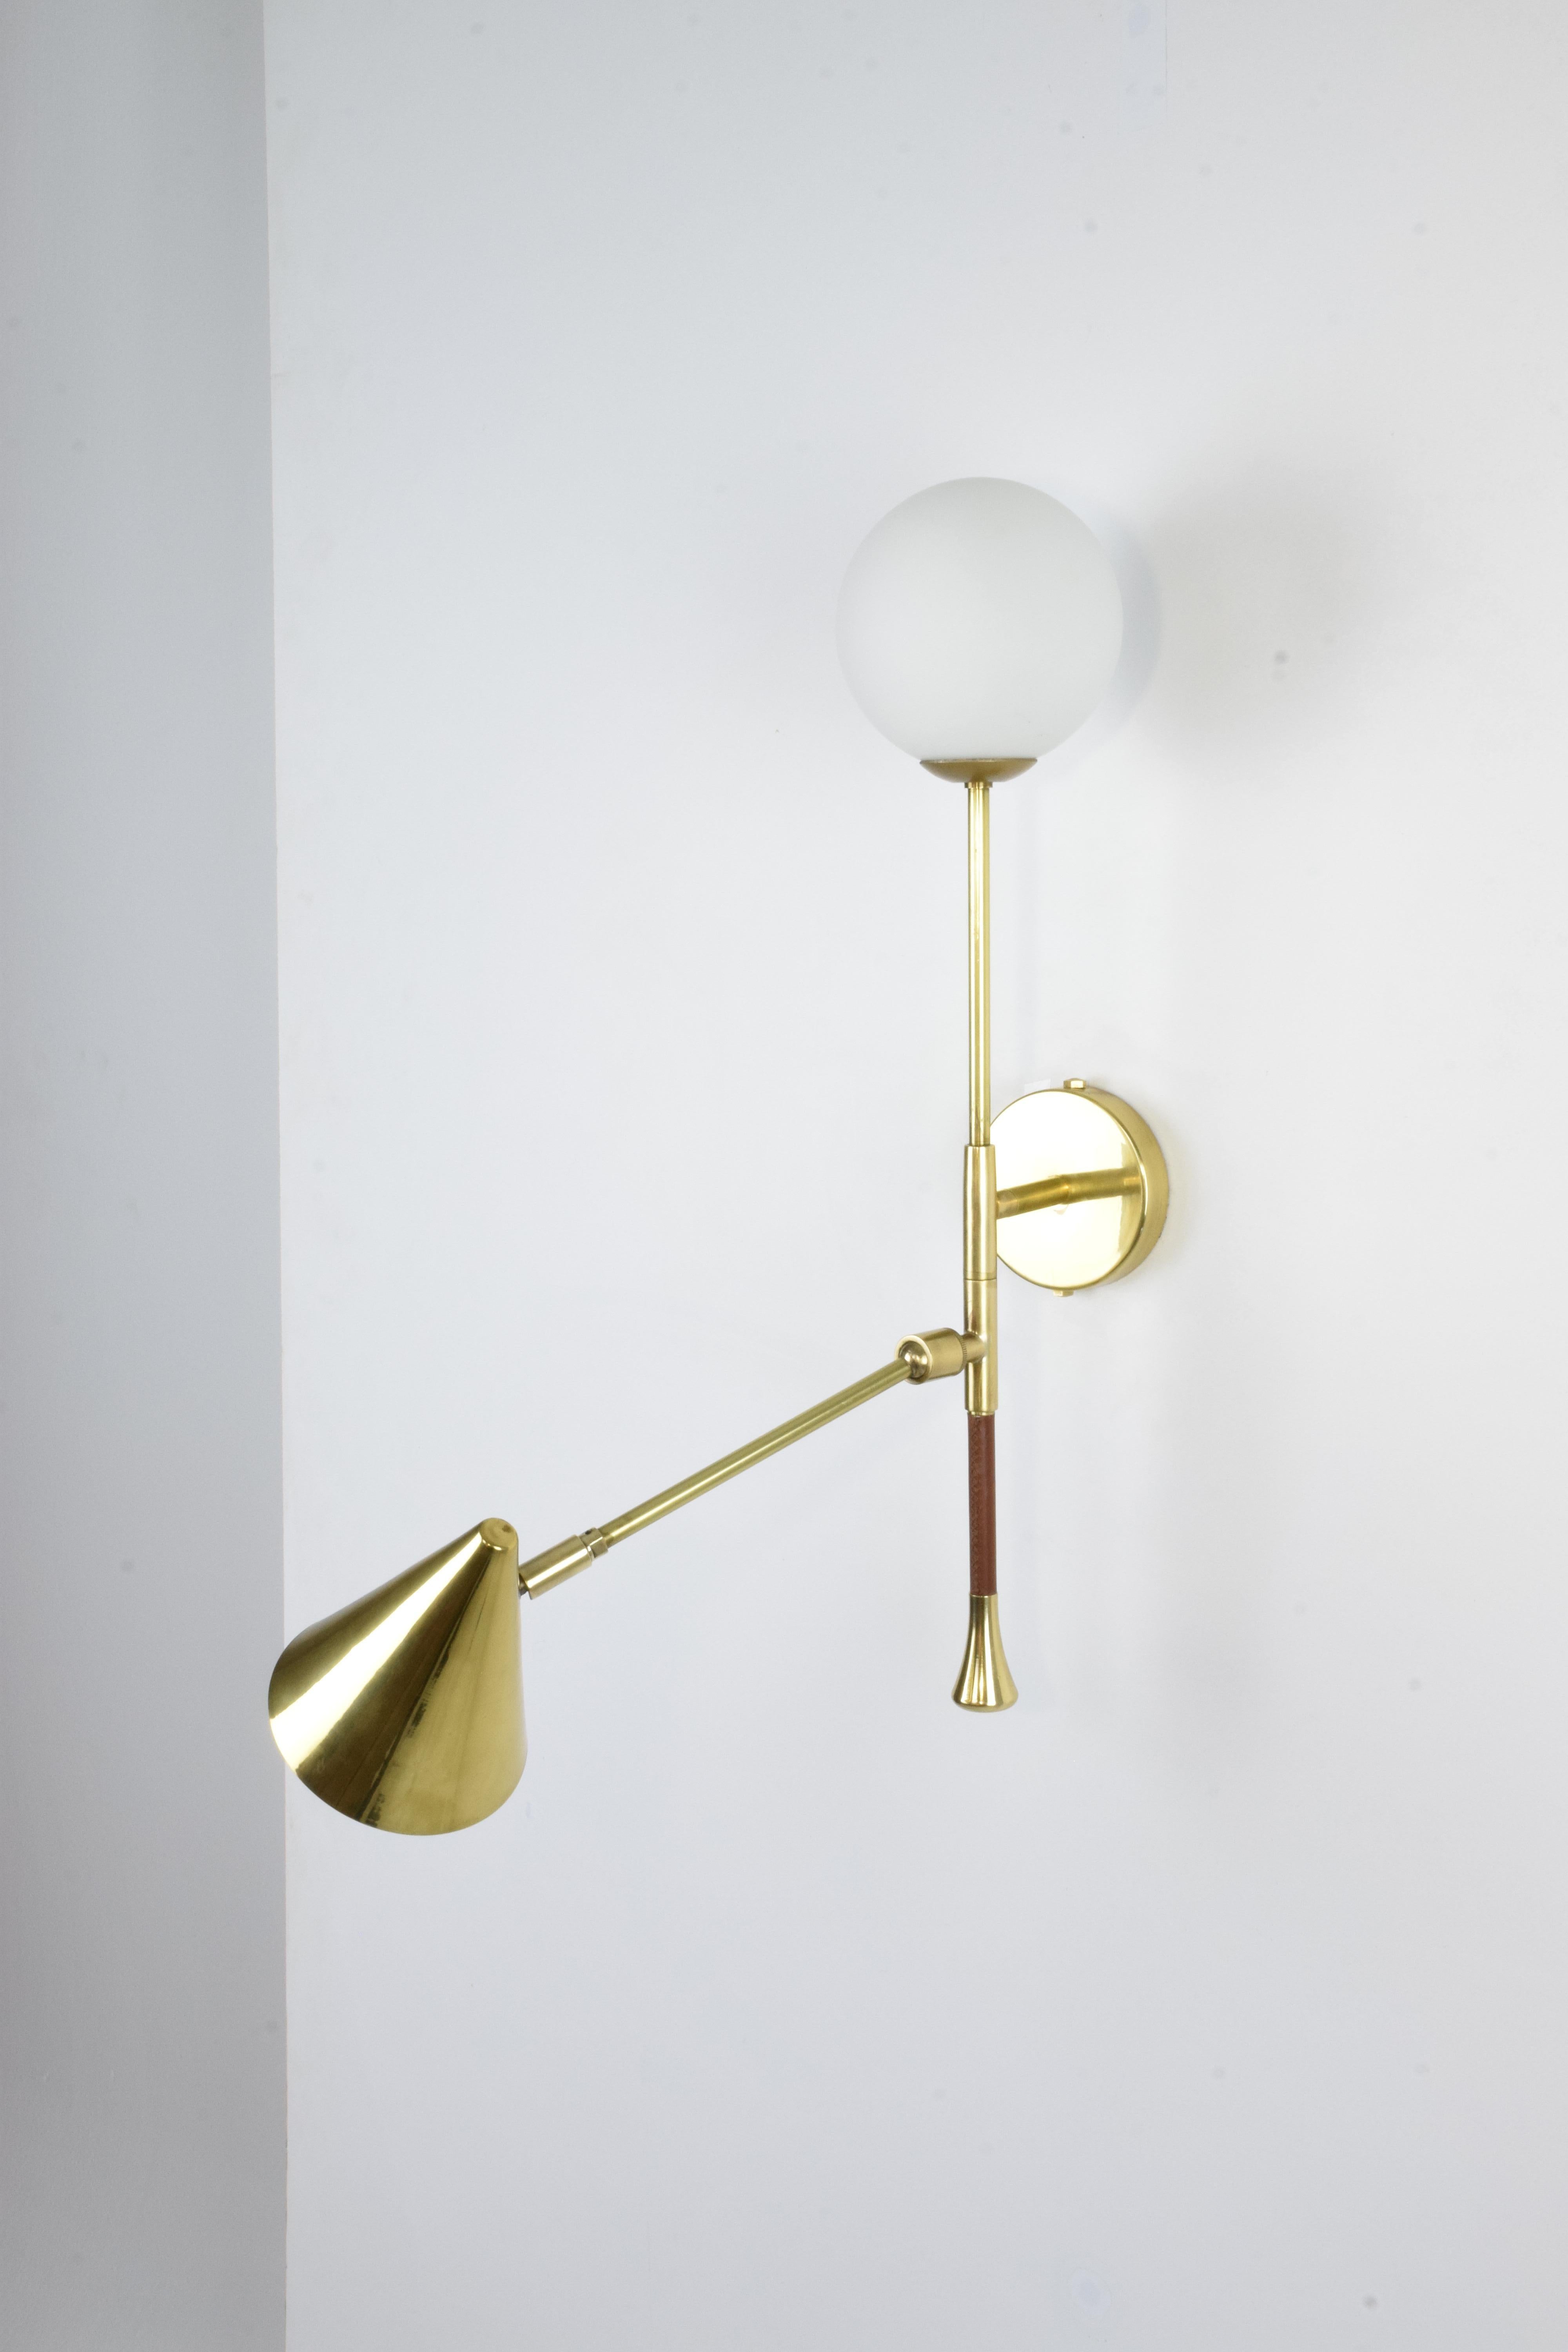 Portuguese De.Light W2 Contemporary Brass Articulating Double Wall Light, Flow 2 Collection